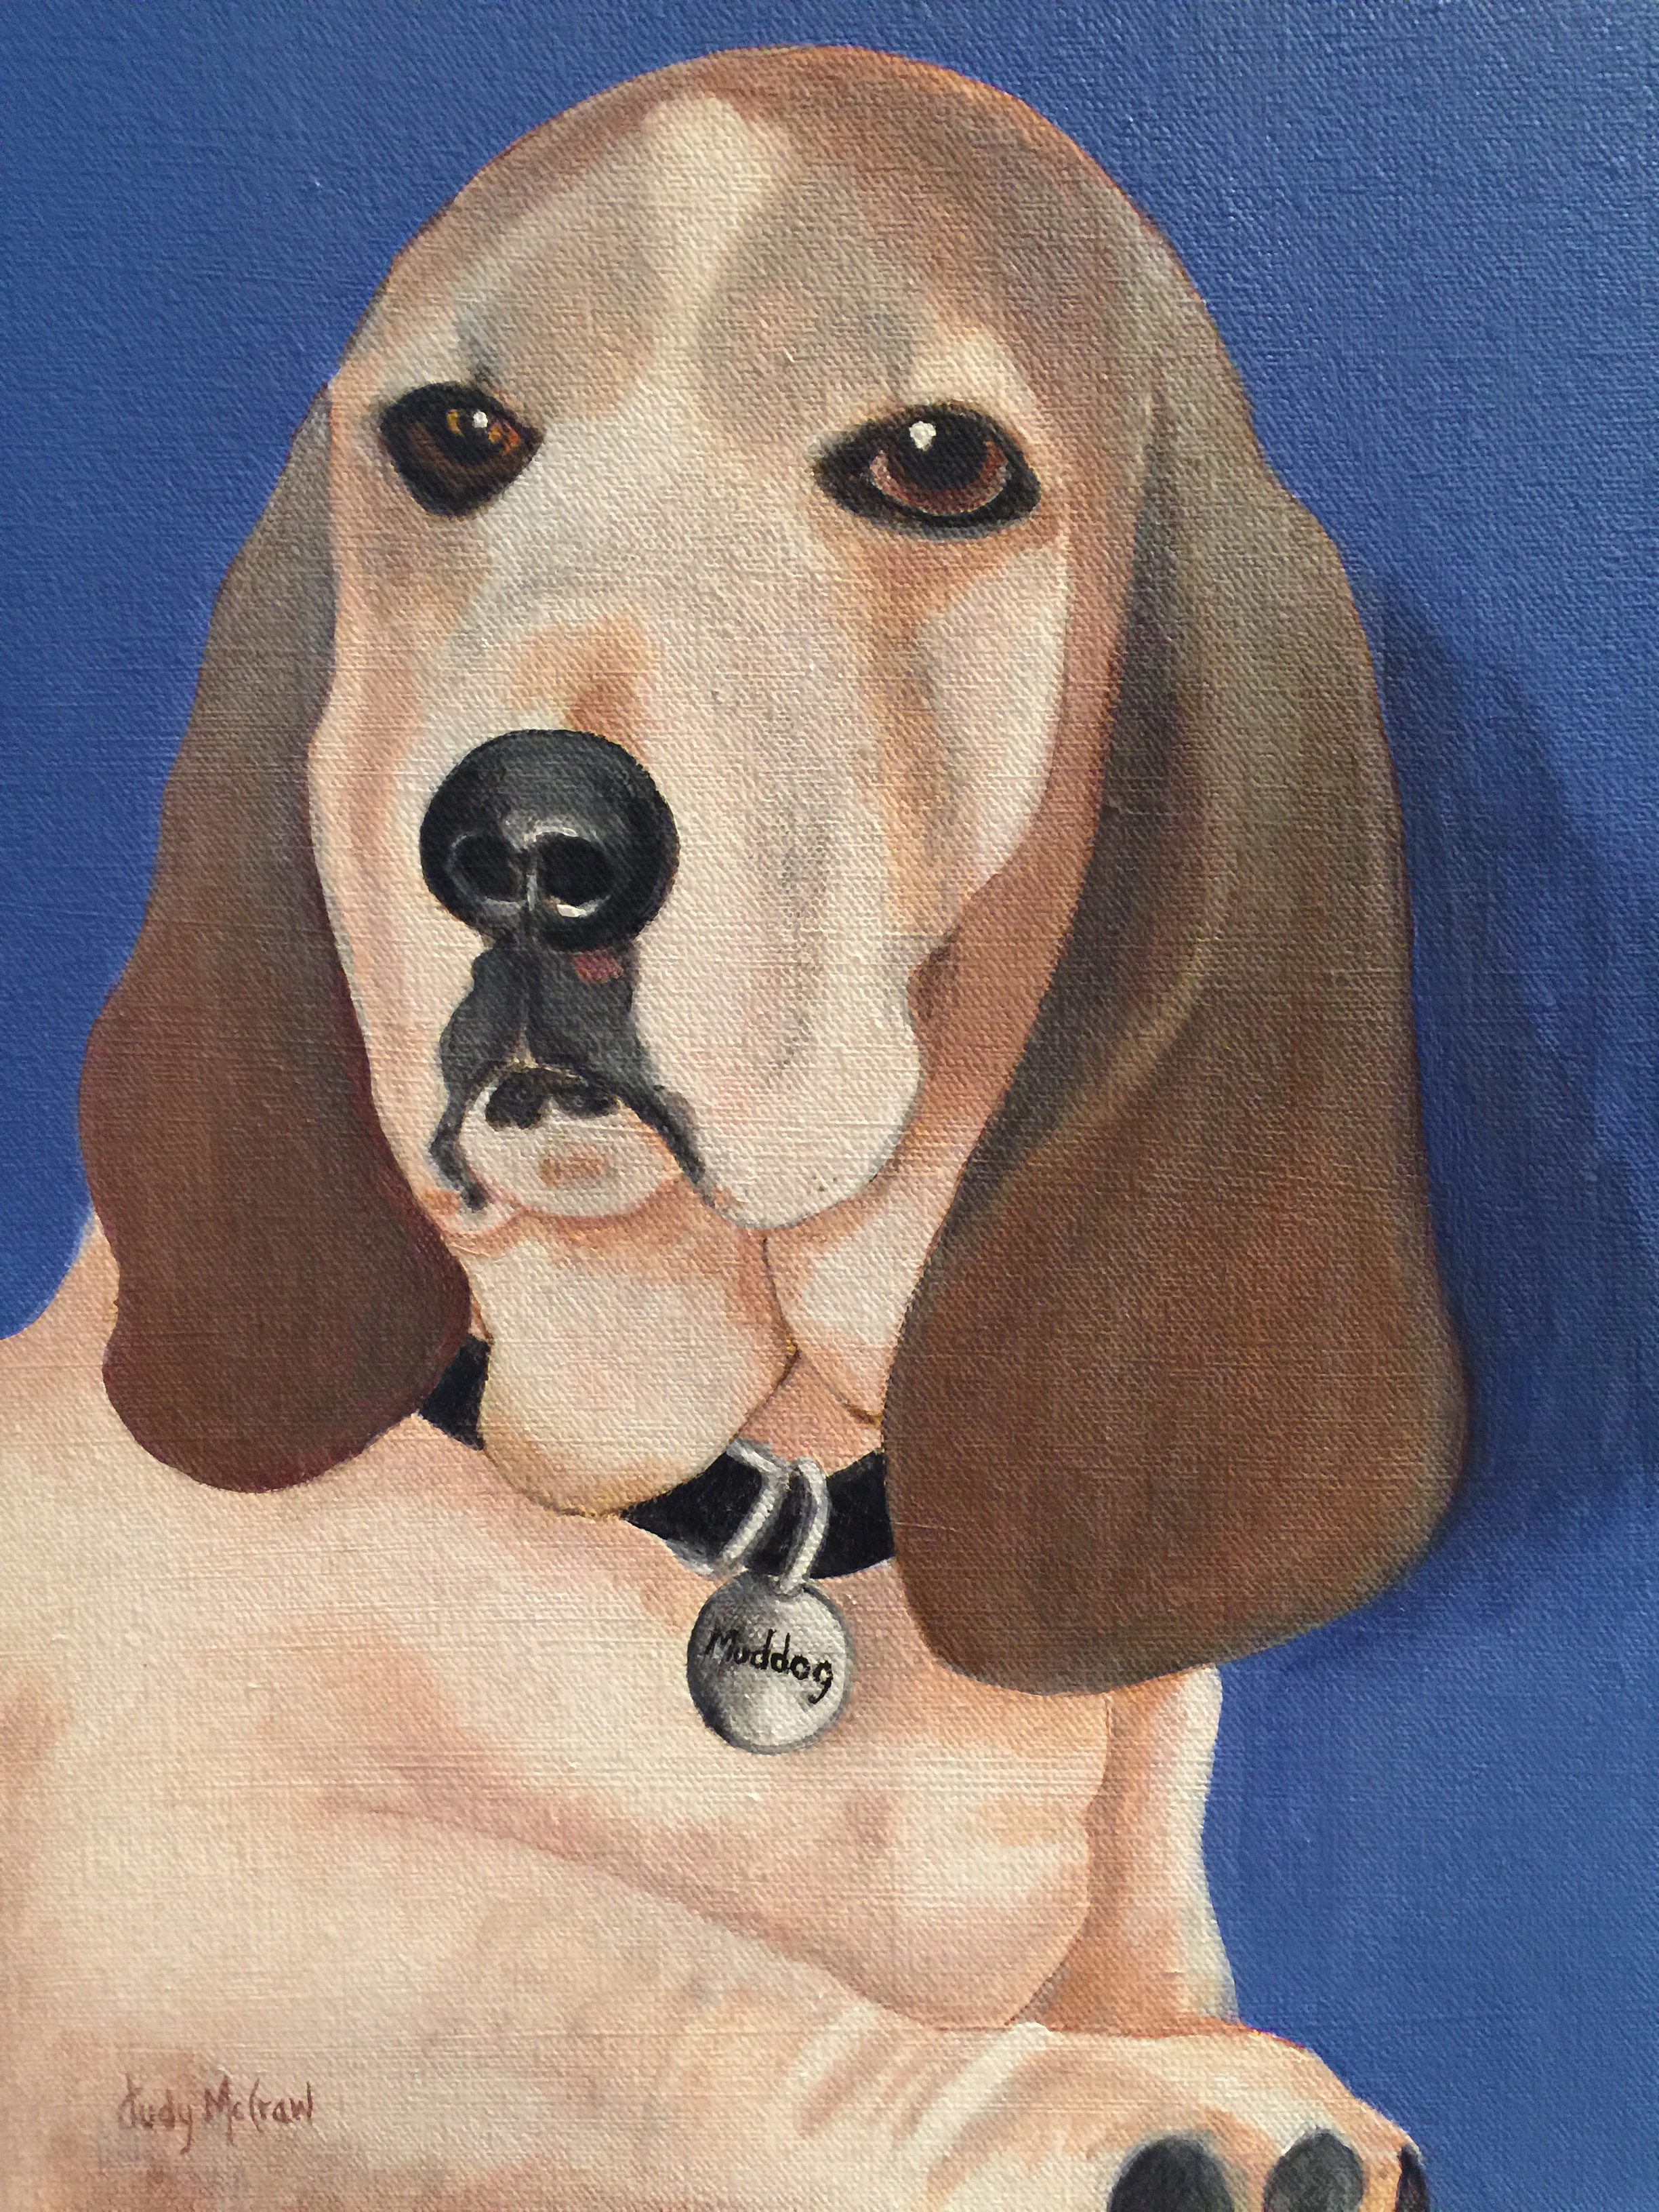 "Buddy" the dignified Basset Hound